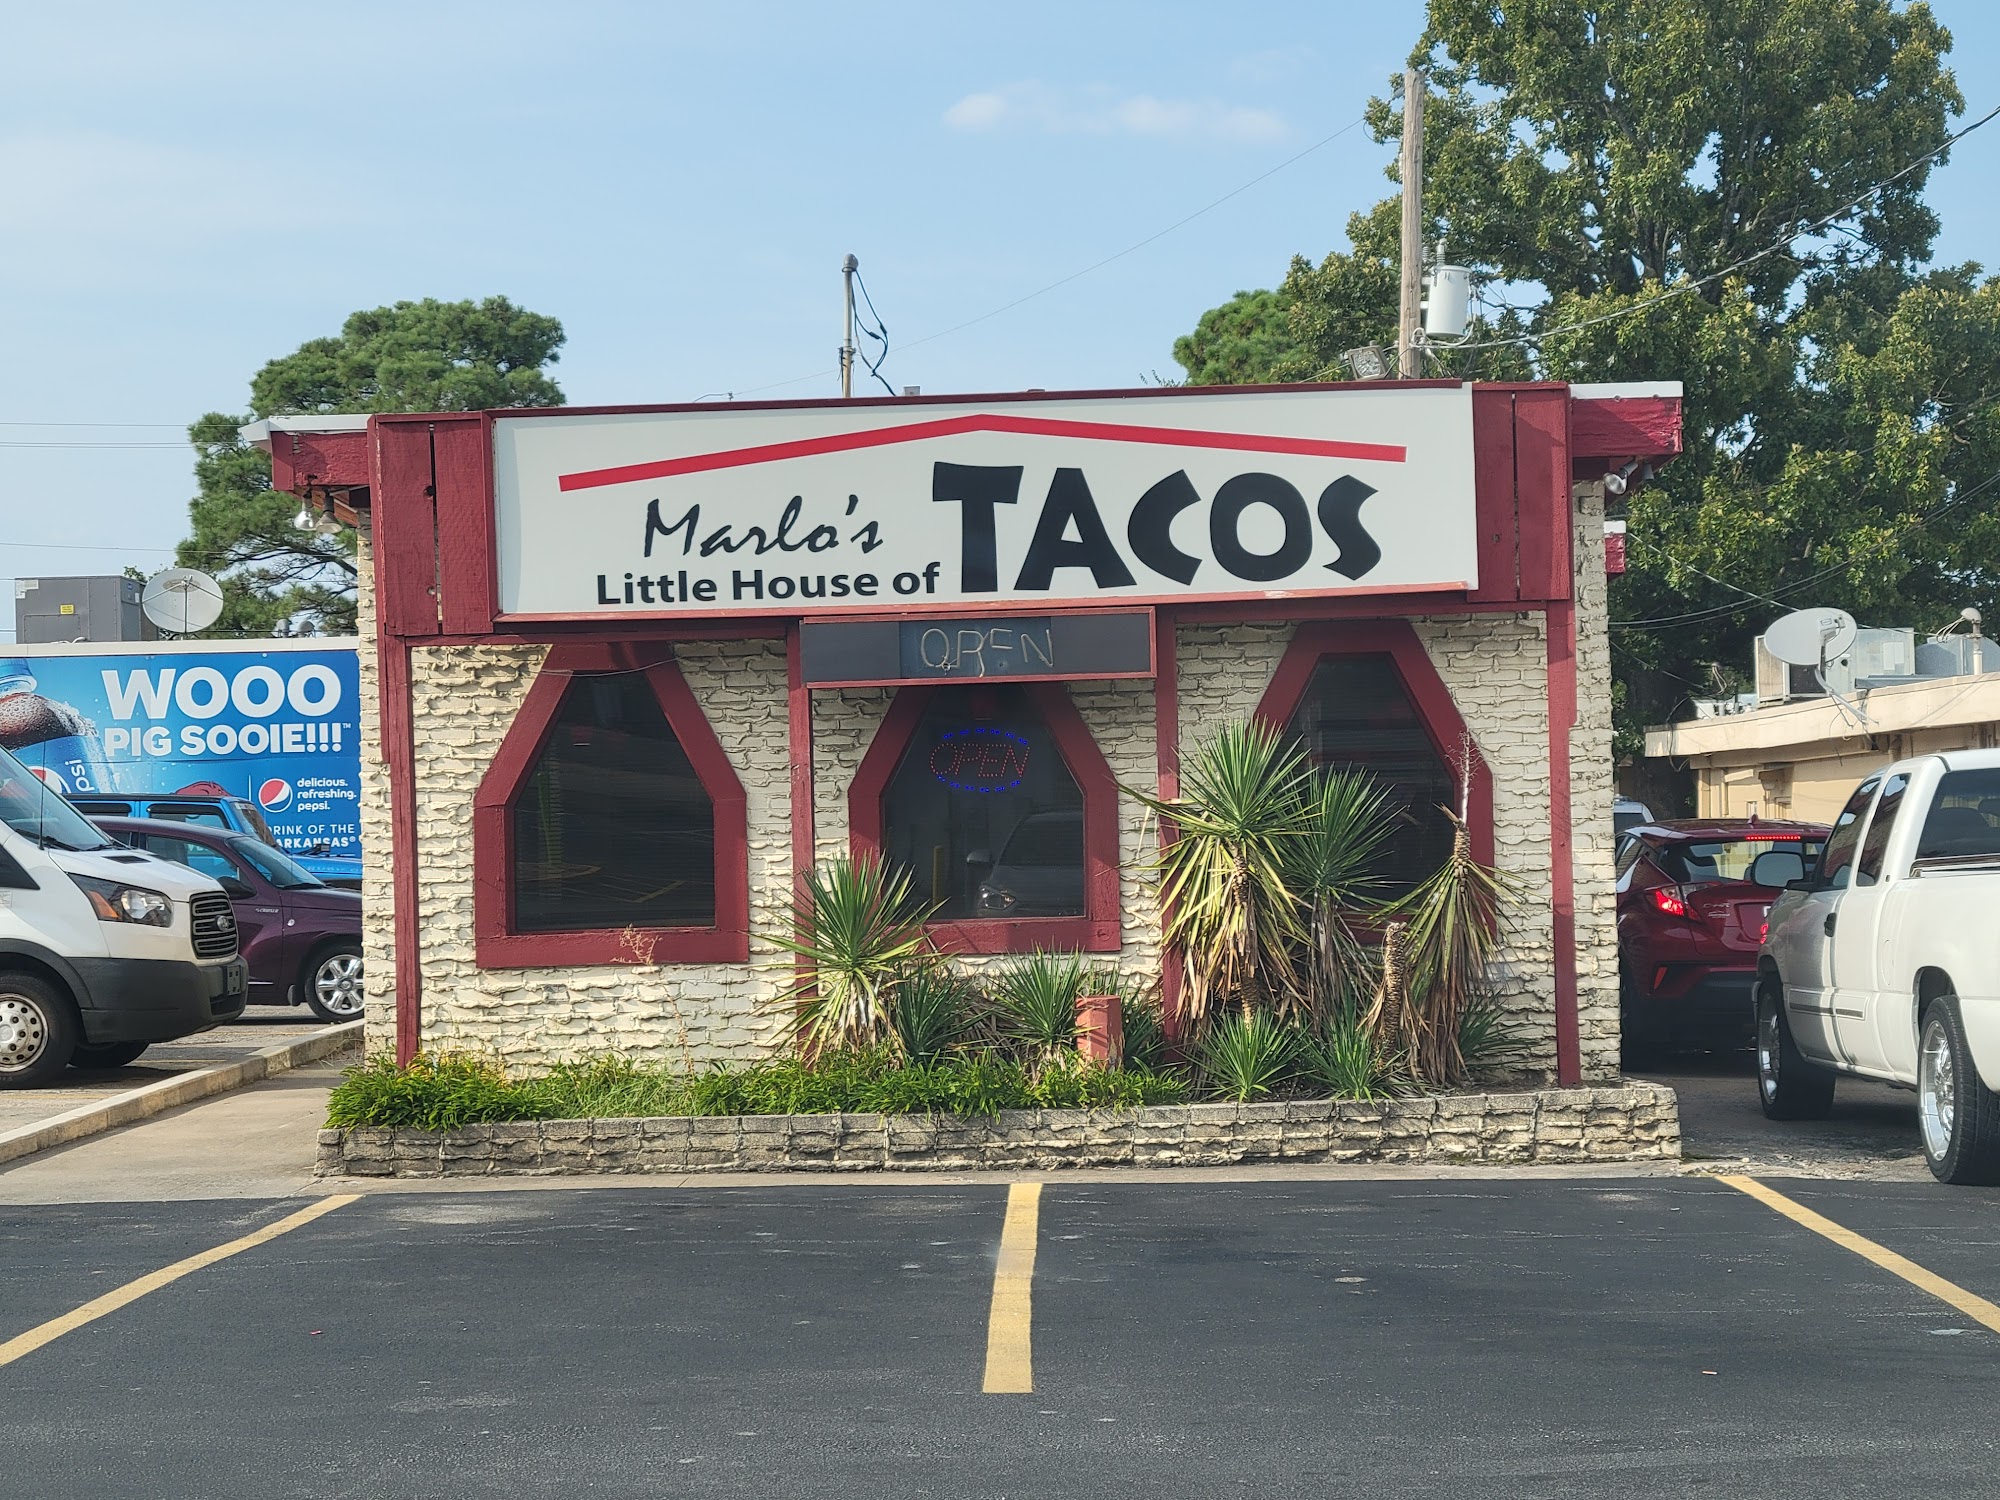 Marlo's Little House of Tacos Garland Ave, Fayetteville, AR 72703